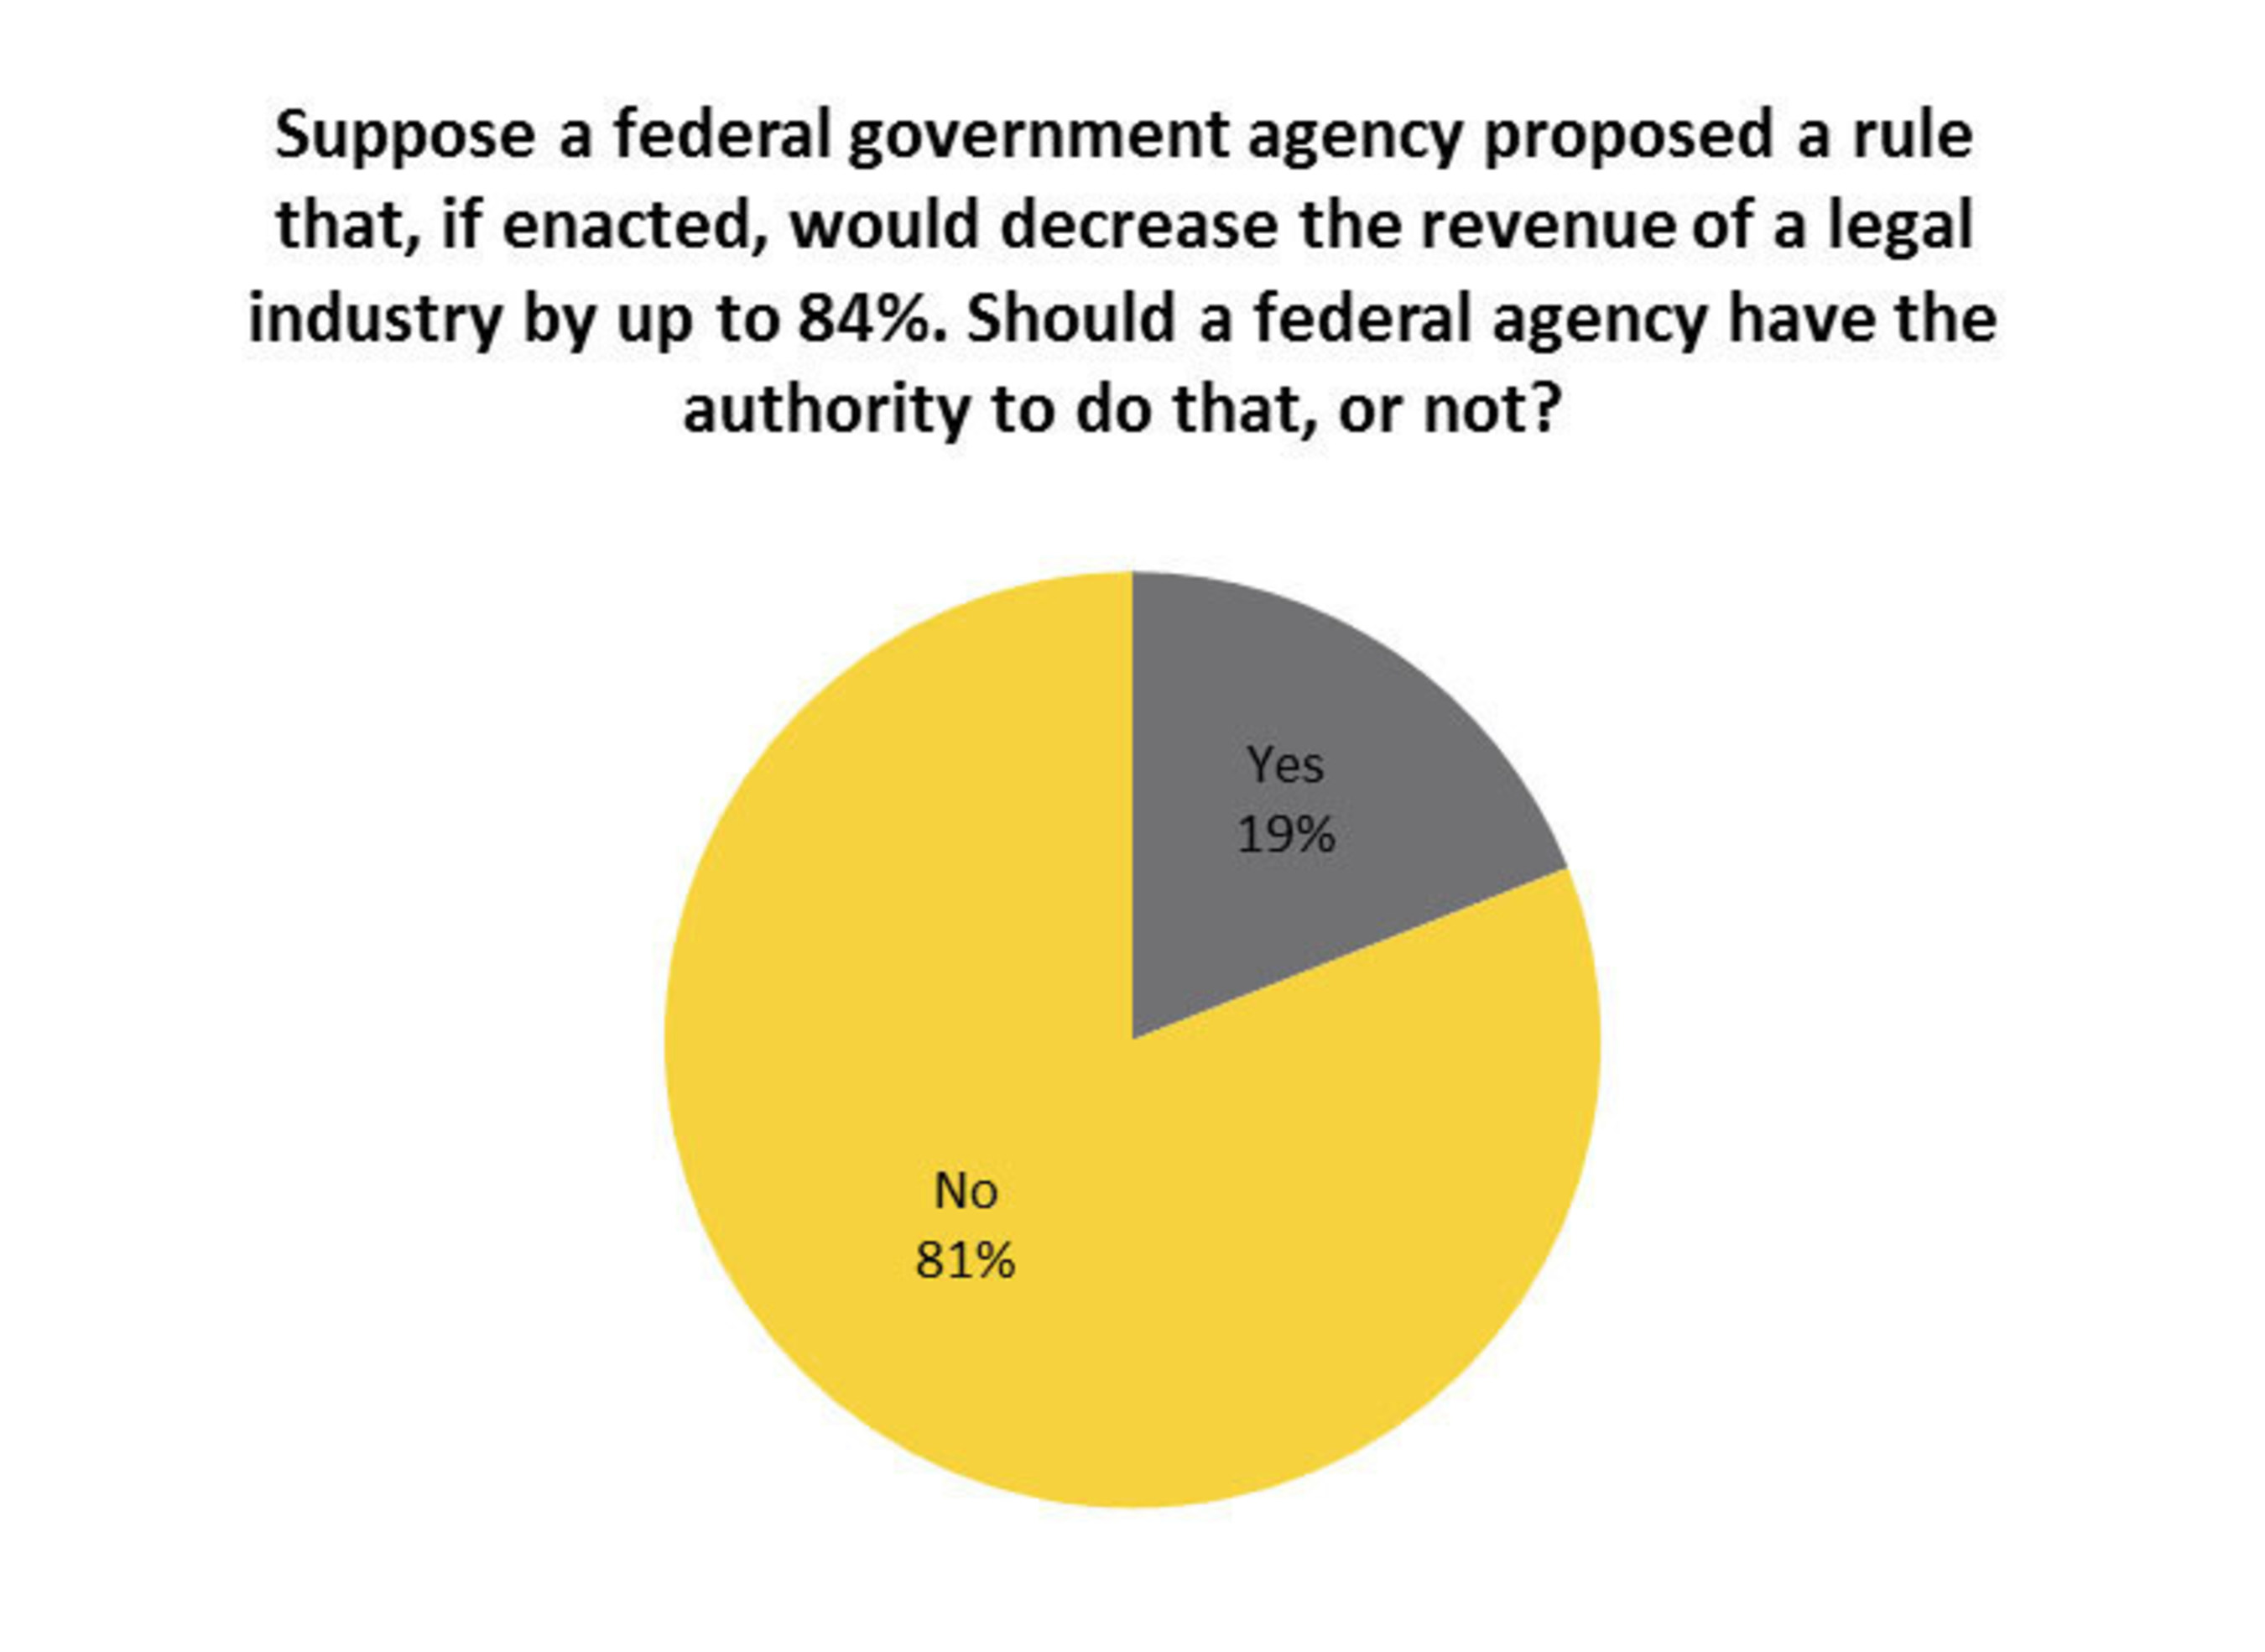 Suppose a federal government agency proposed a rule that, if enacted, would decrease the revenue of a legal industry by up to 84%. Should a federal agency have the authority to do that, or not?